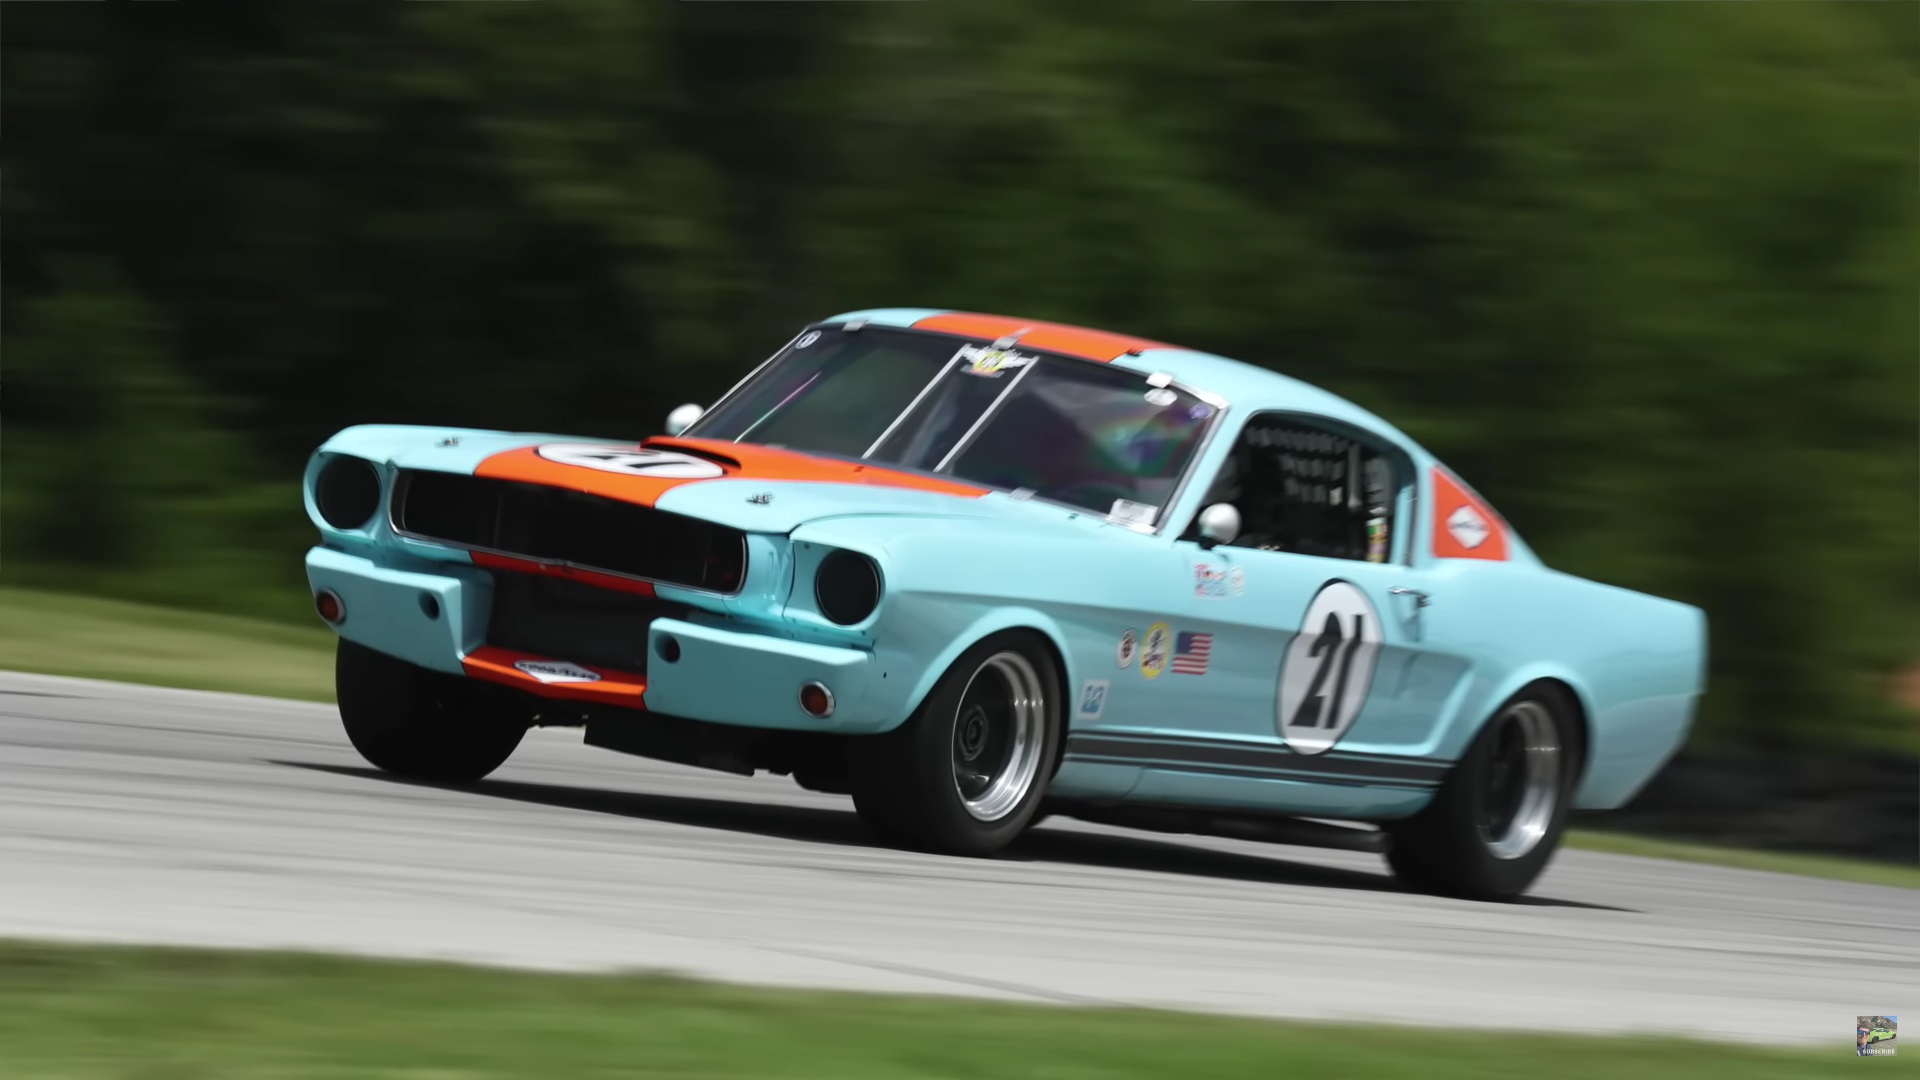 Listen To This Screaming 1965 K-Code Mustang Racer!